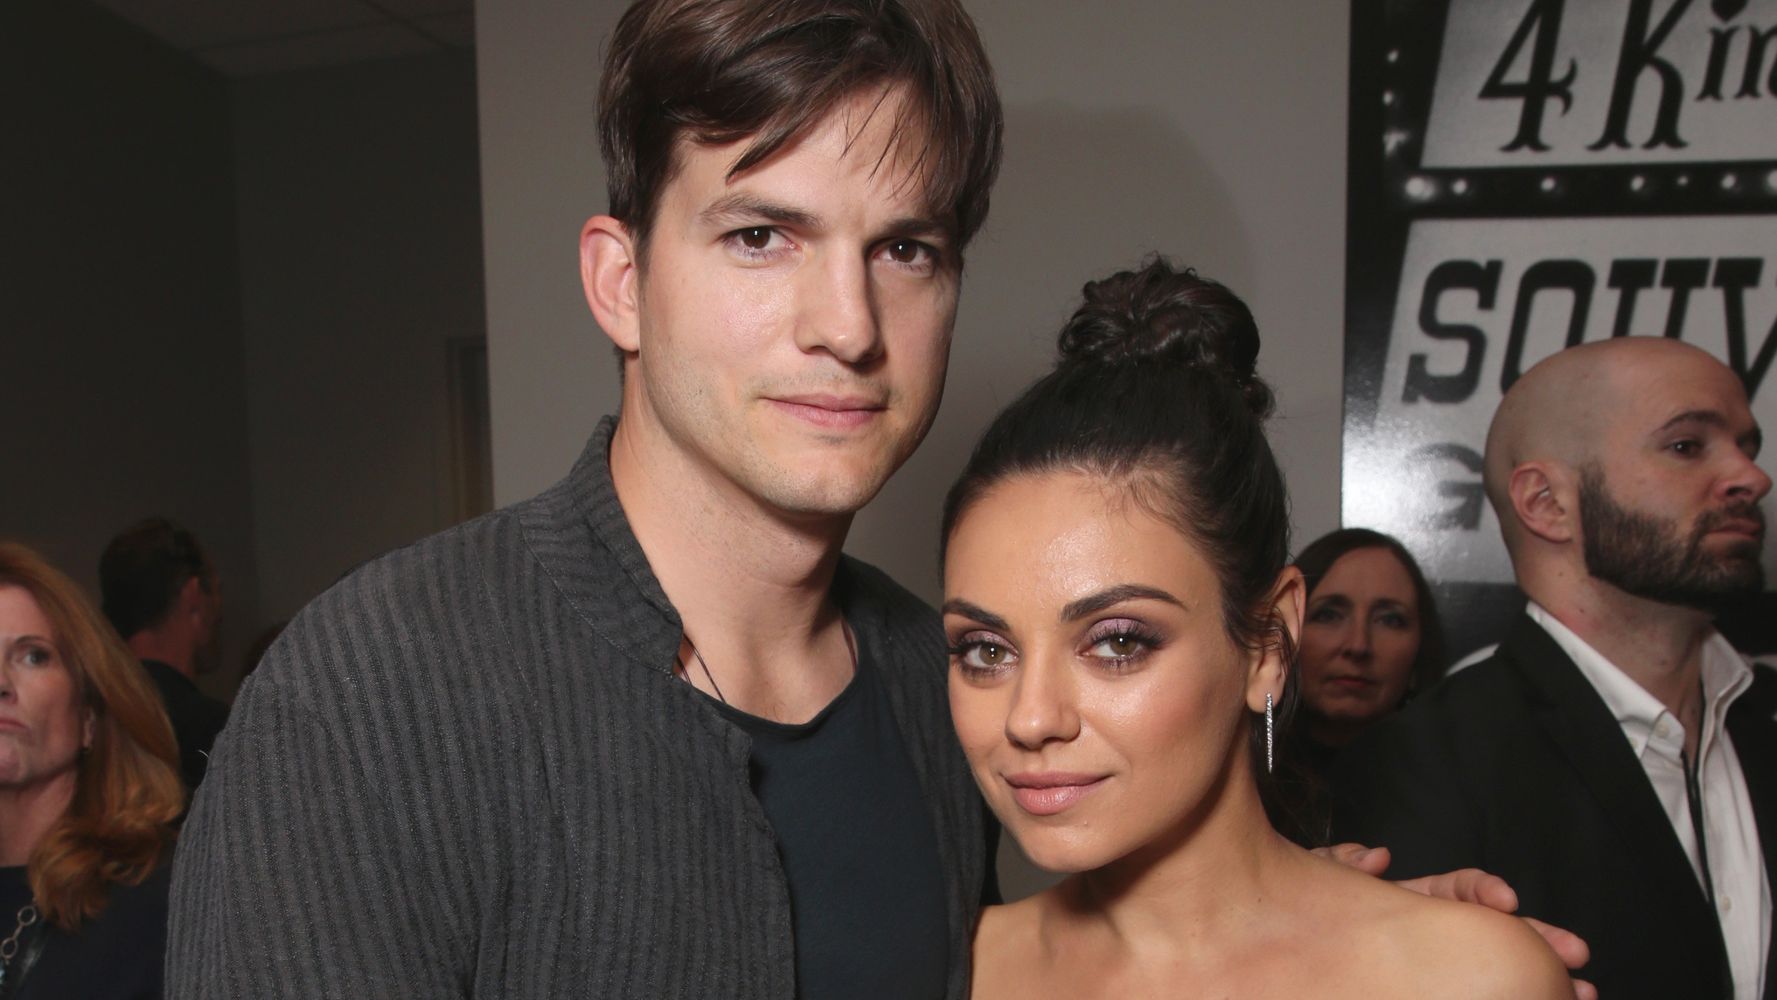 Ashton Kutcher And Mila Kunis Reportedly Get Married In Secret Ceremony Huffpost Entertainment